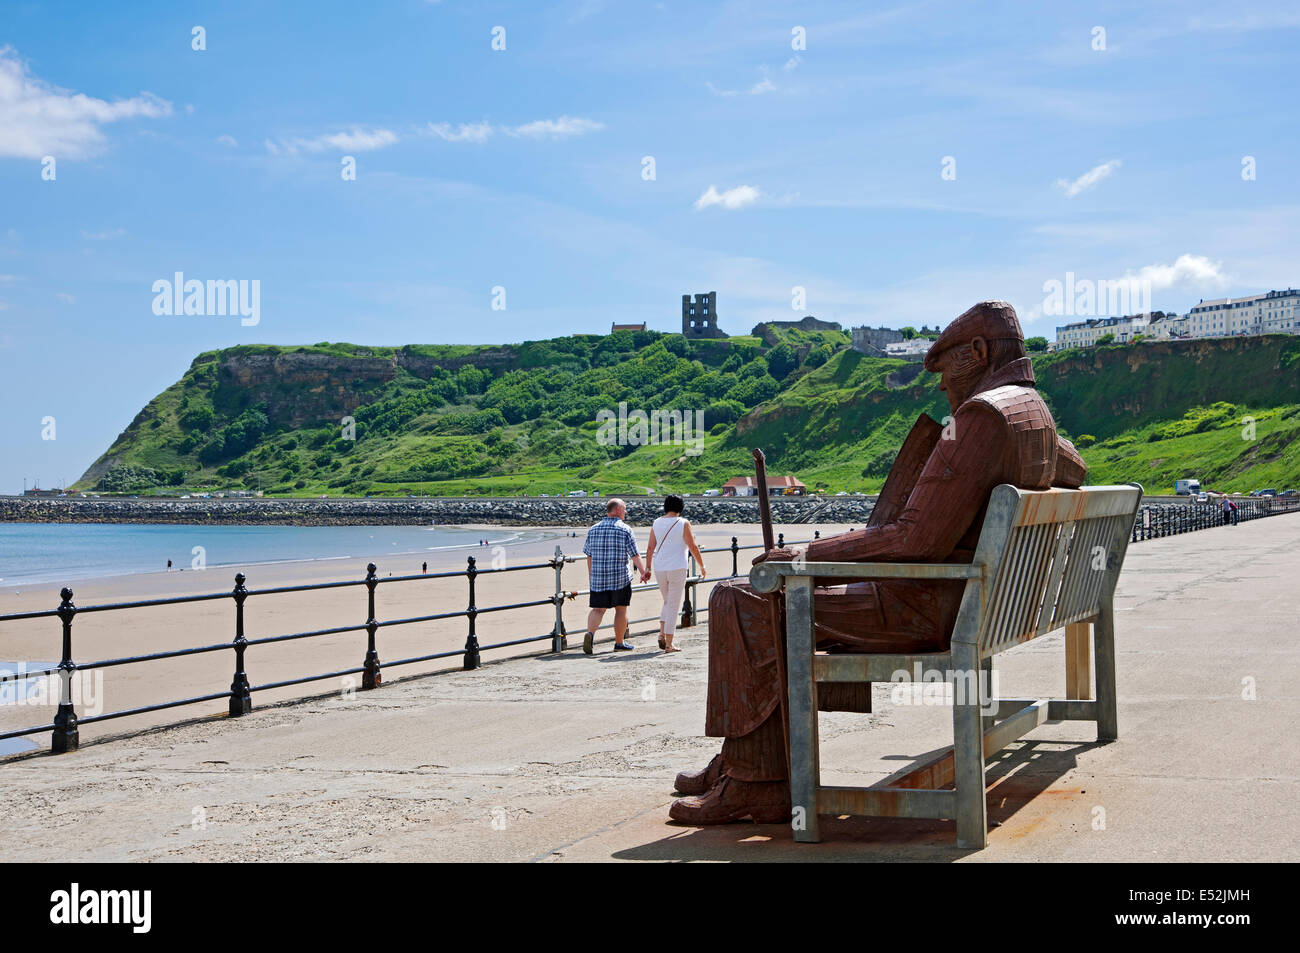 People tourists and large steel sculpture of former miner in summer North Bay Scarborough North Yorkshire England UK United Kingdom GB Great Britain Stock Photo